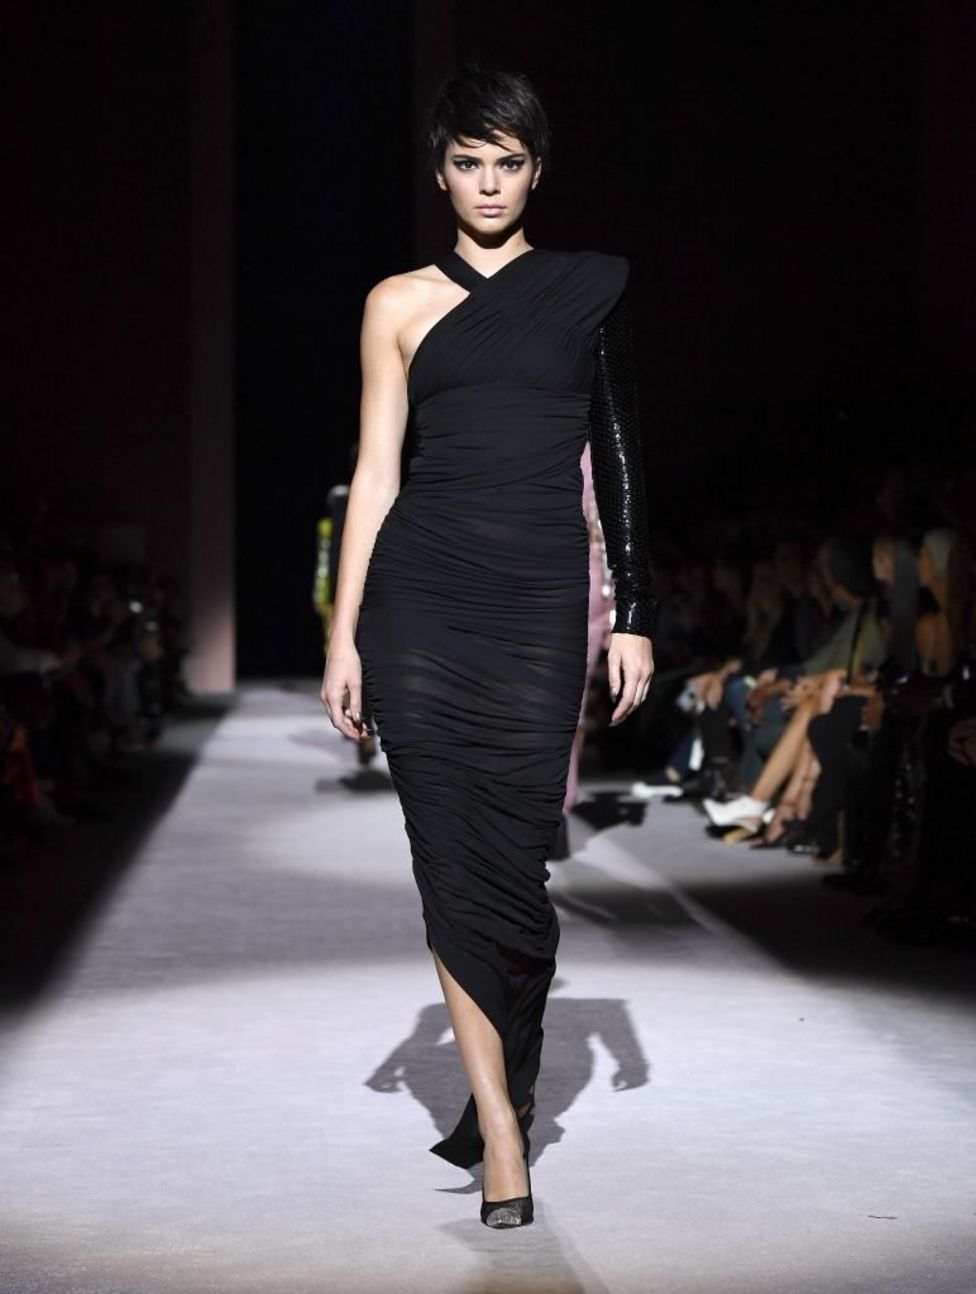 Tom Ford opens New York Fashion Week with Gigi Hadid and Kendall Jenner ...